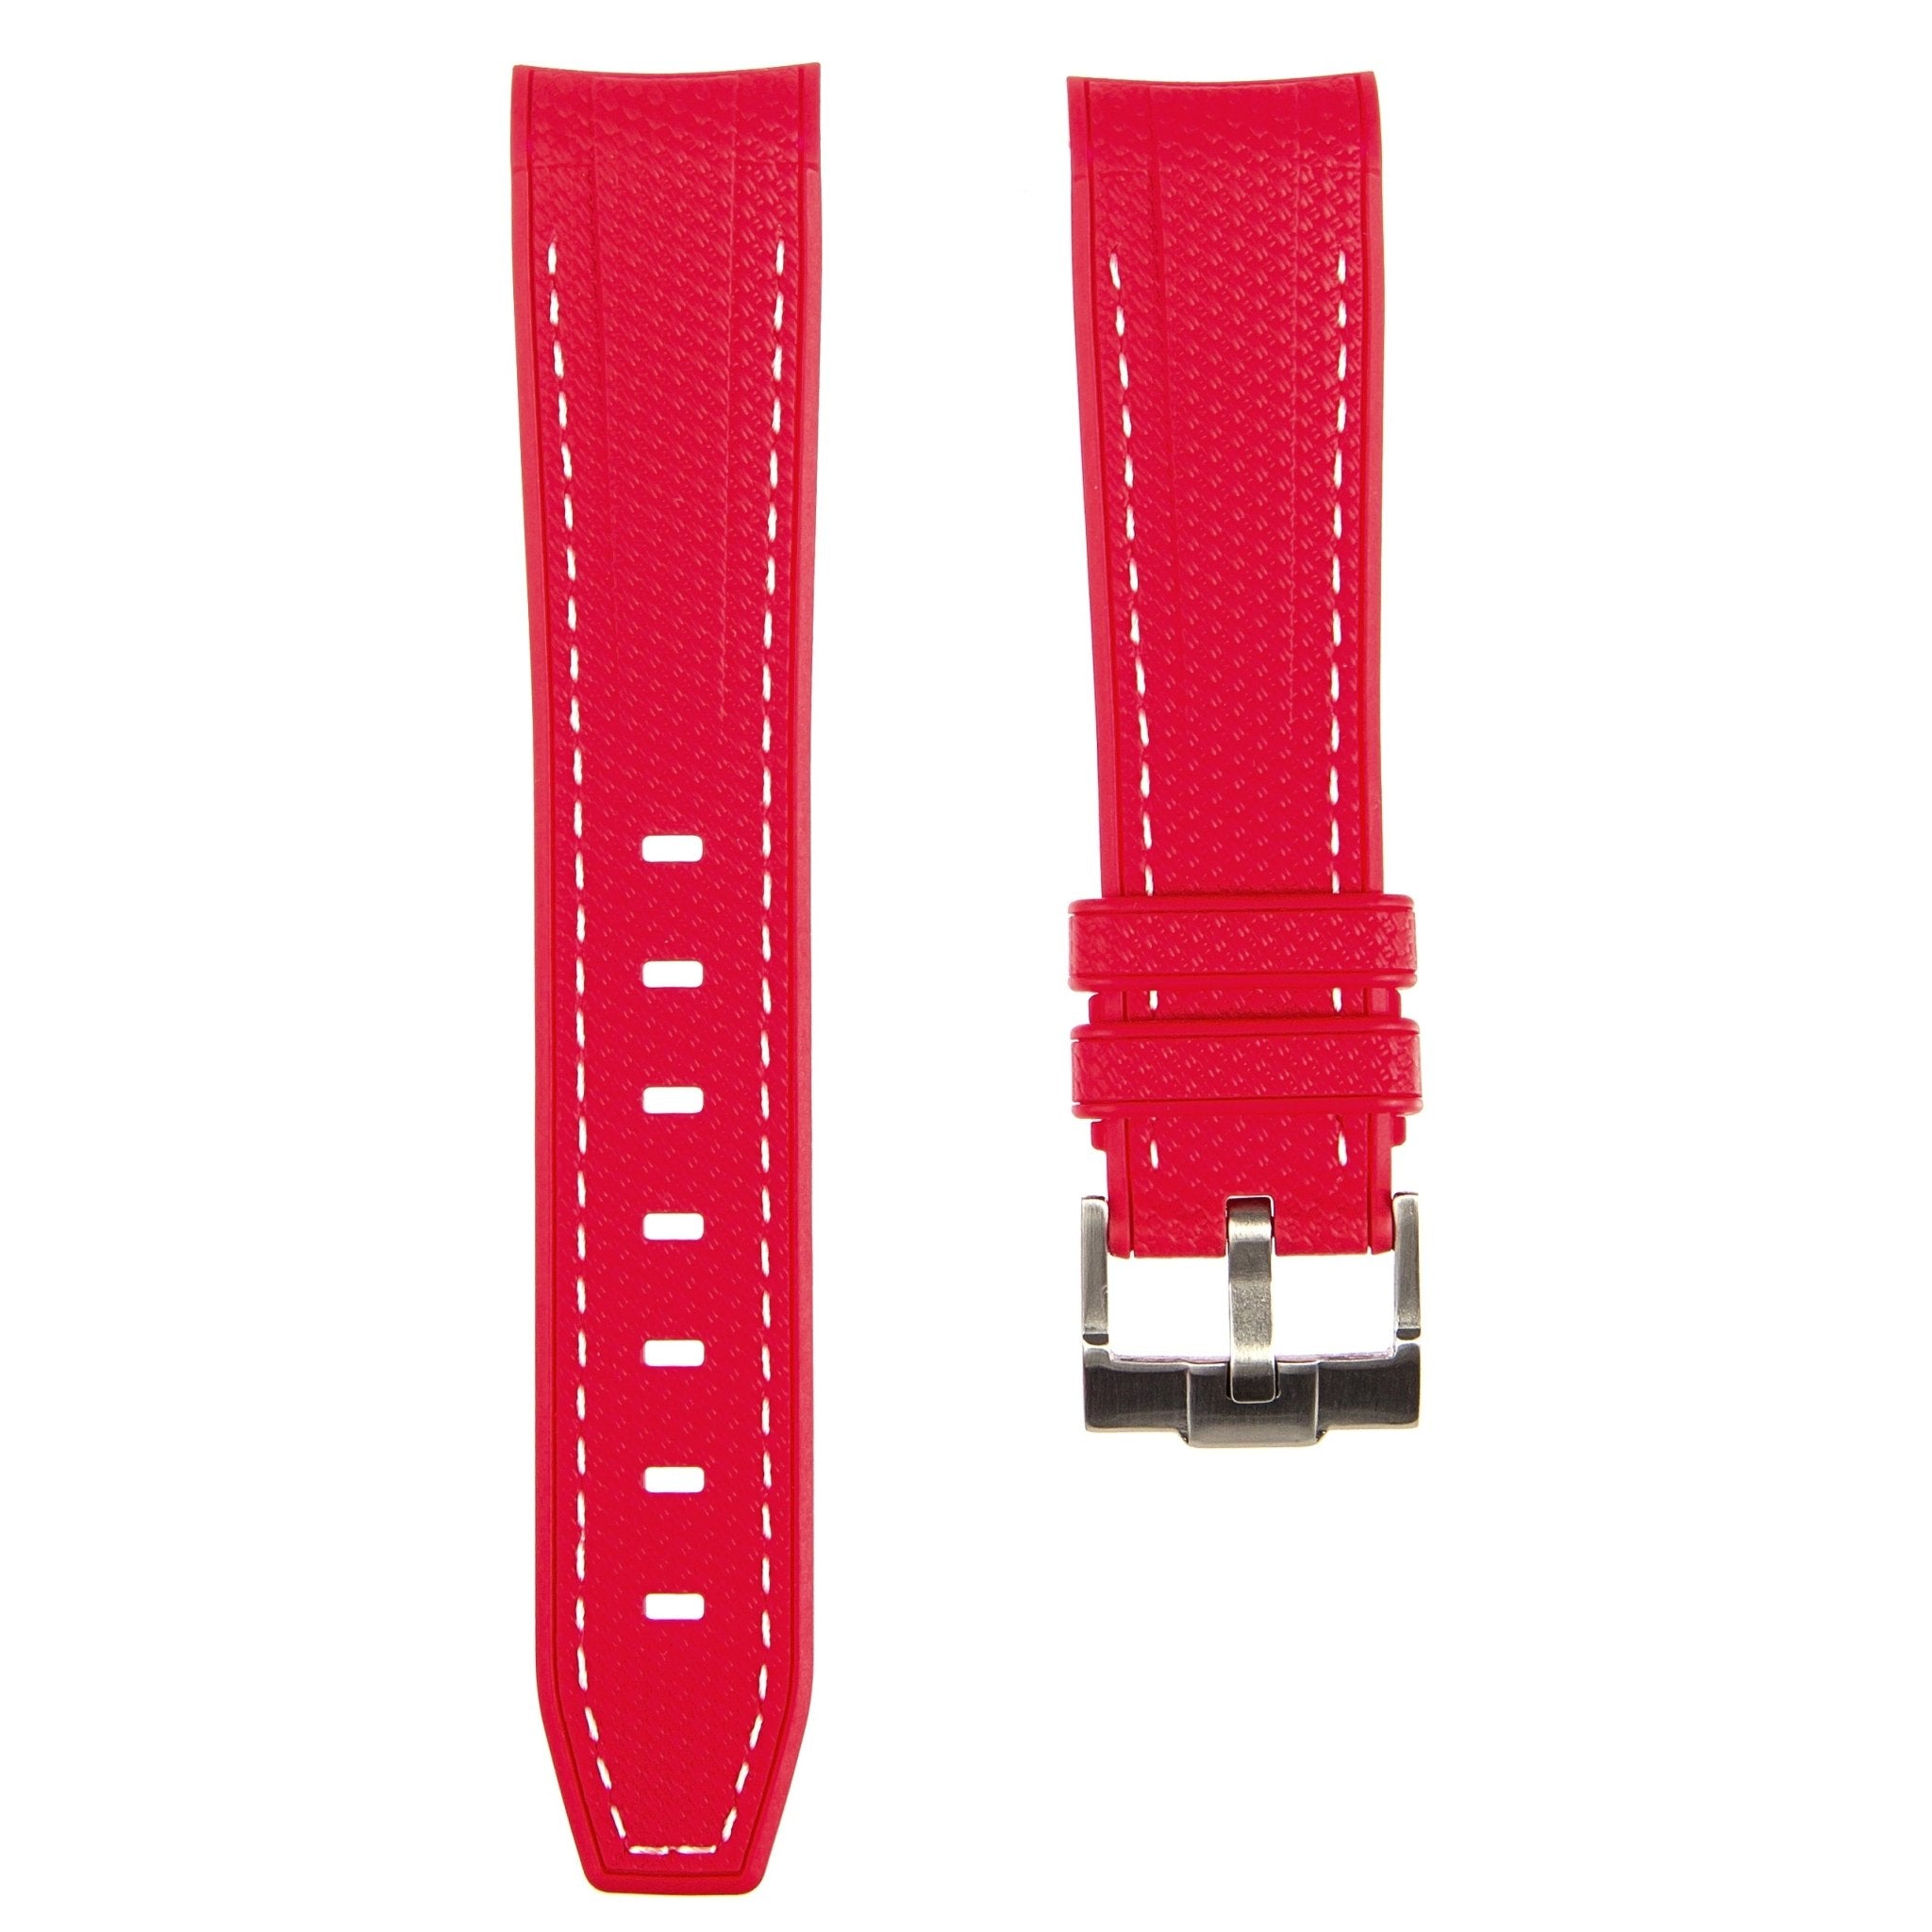 Textured Curved End Premium Silicone Strap – Compatible with Rolex Submariner – Red with White Stitch (2405) -StrapSeeker